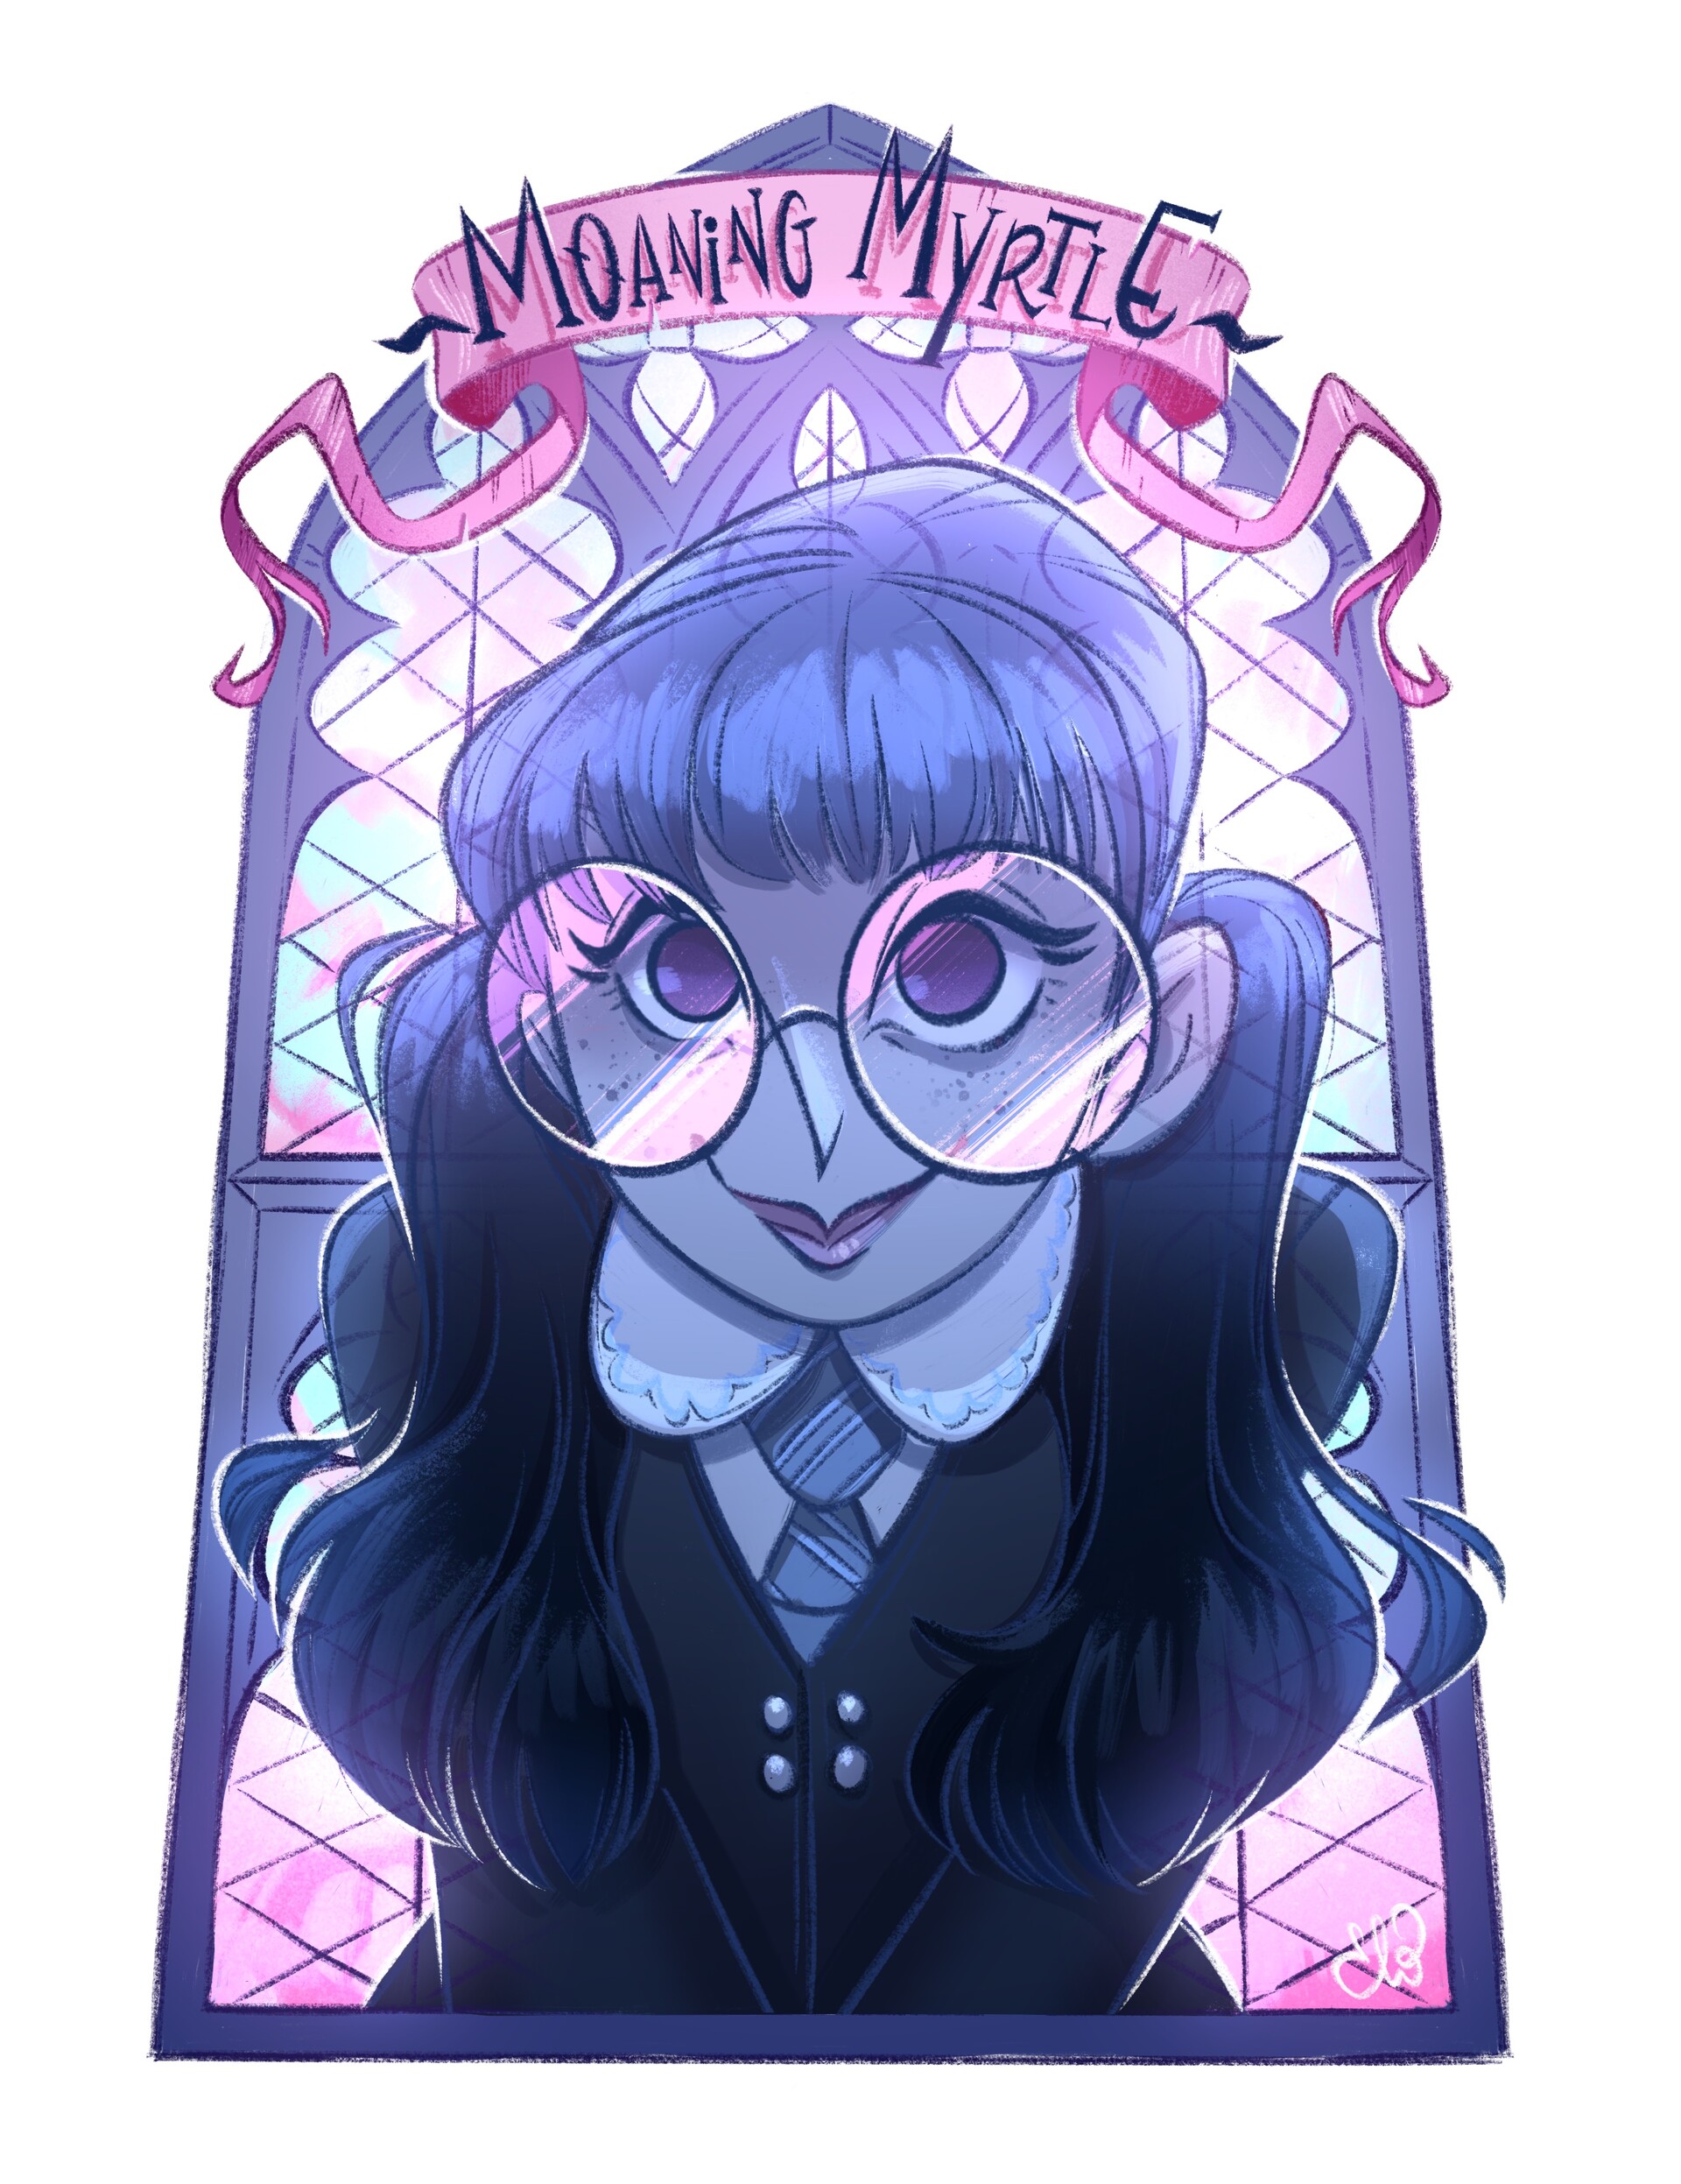 Moaning Myrtle.